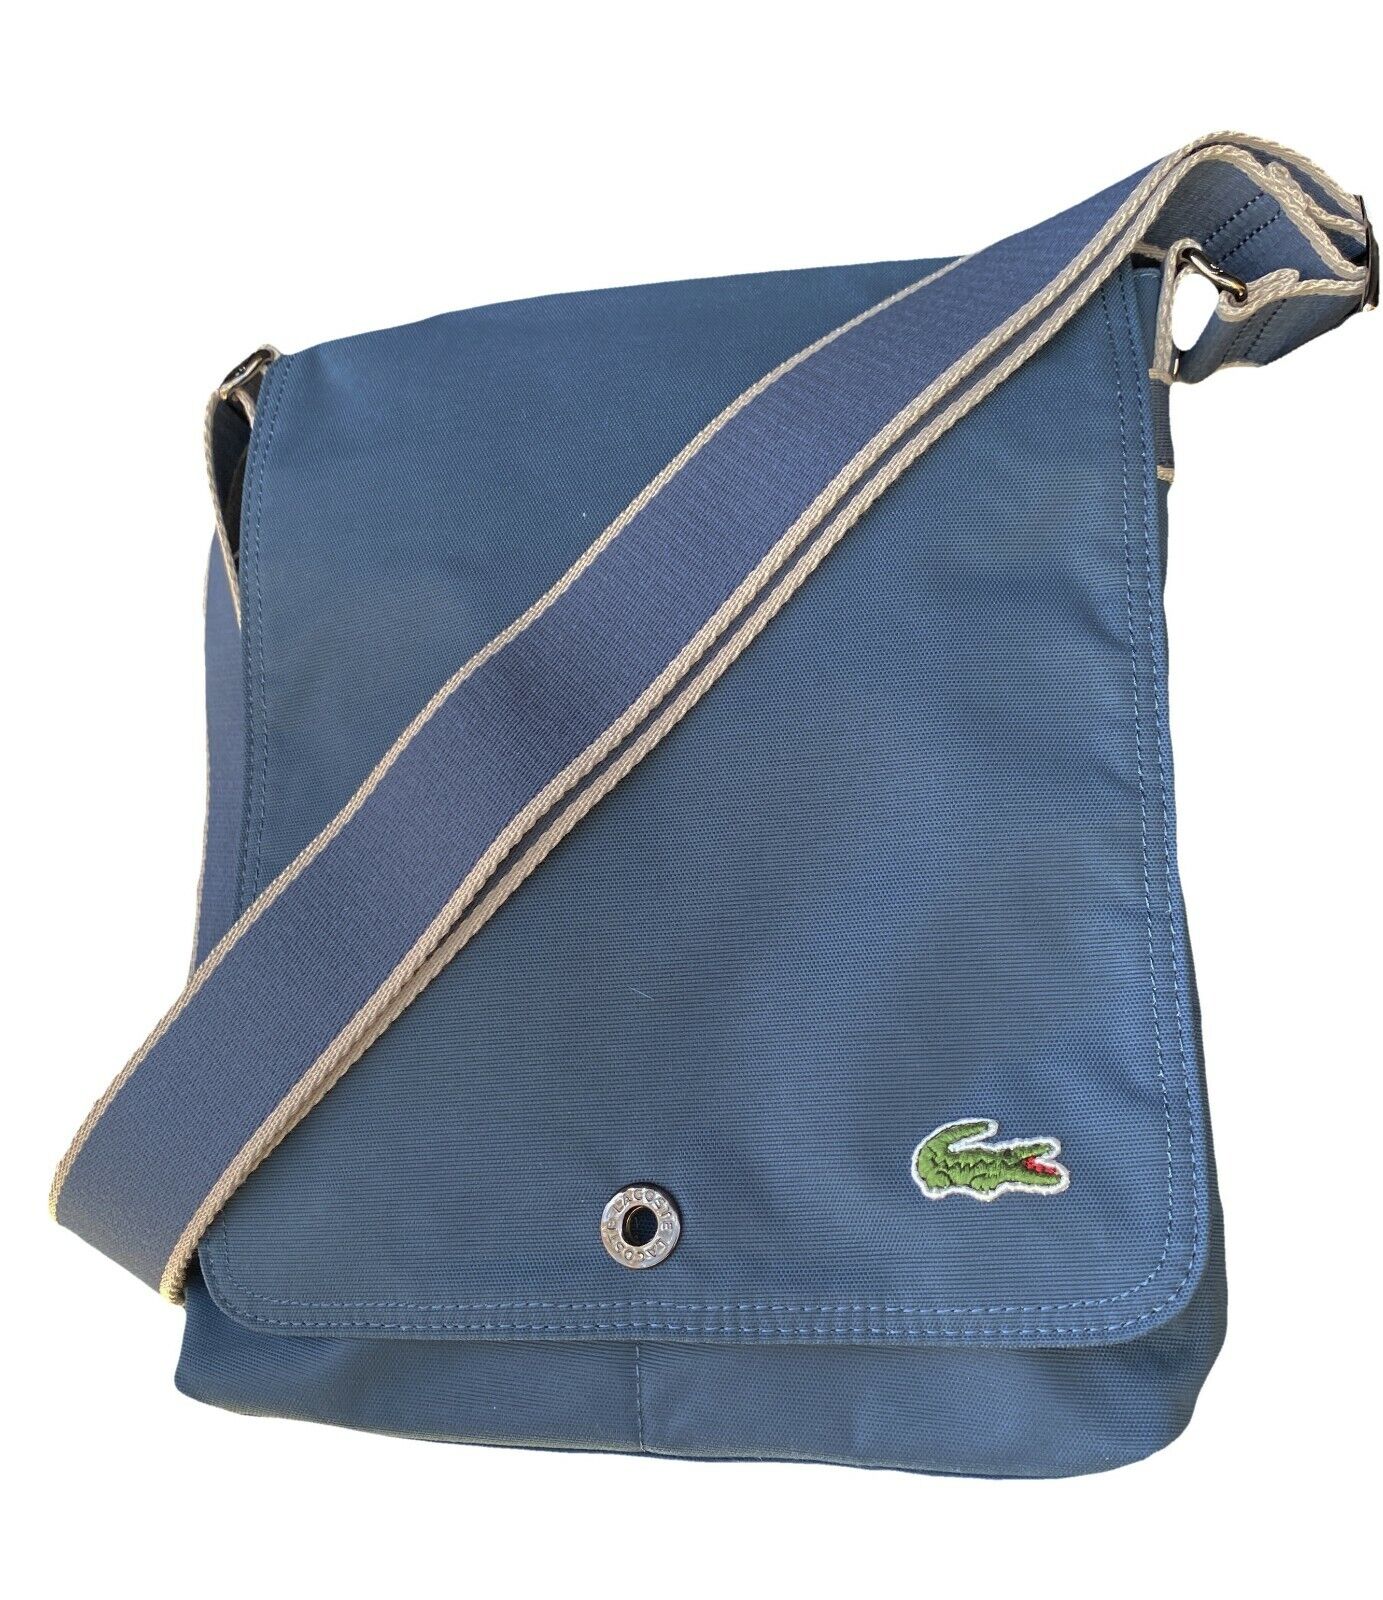 New Authentic MESSENGER BAG Small new City Casual 3 Blue | eBay